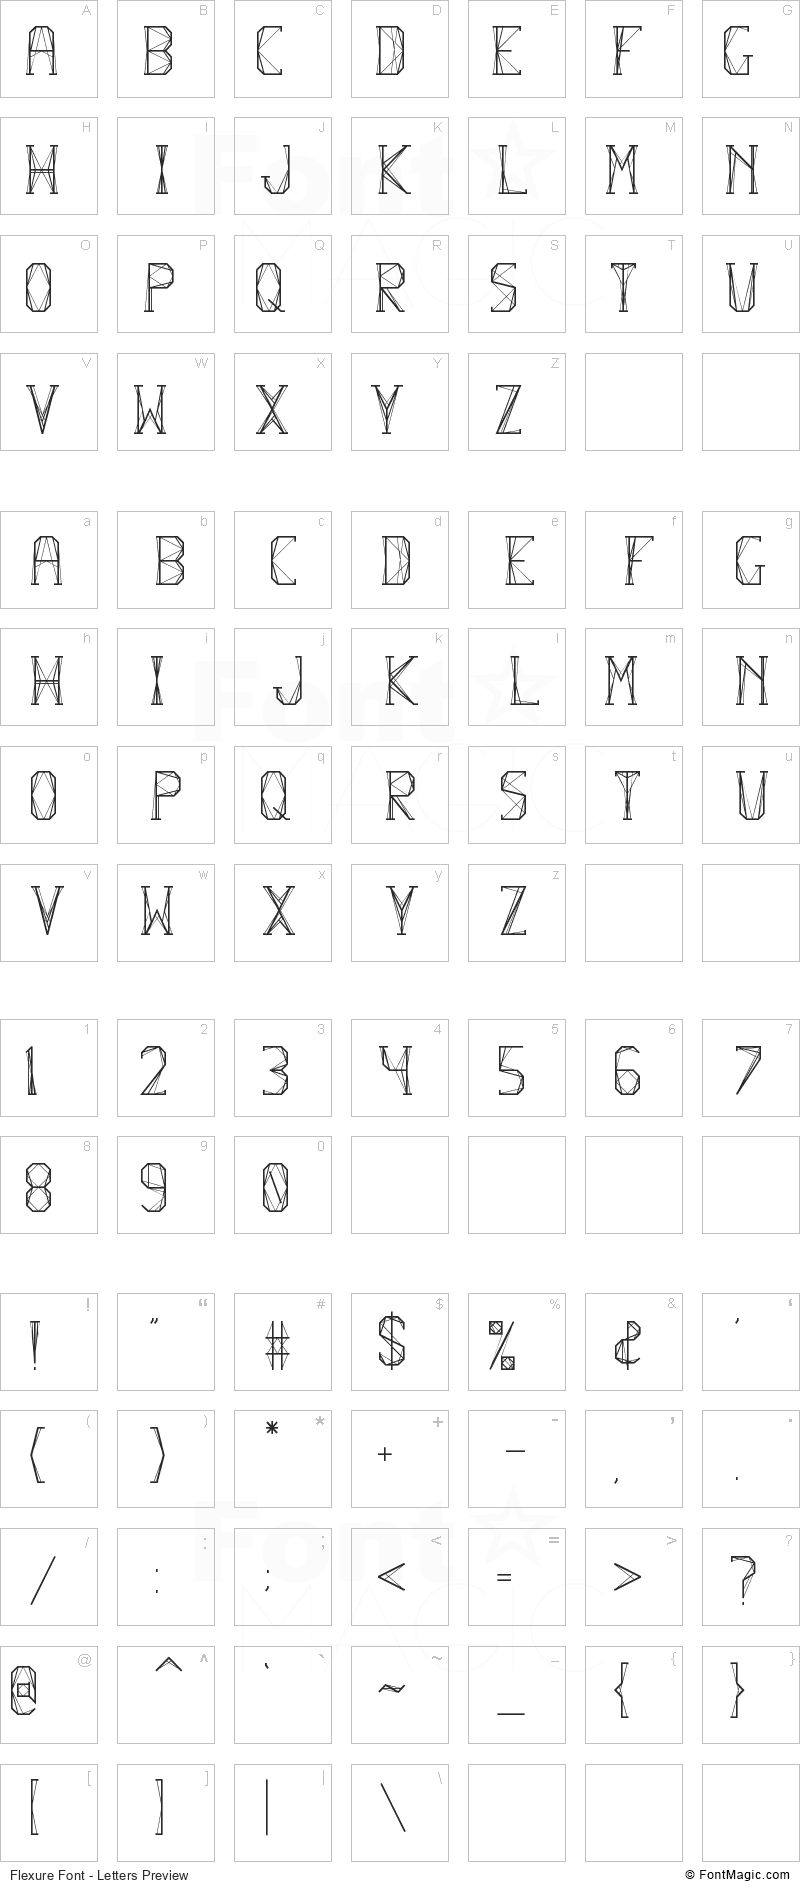 Flexure Font - All Latters Preview Chart